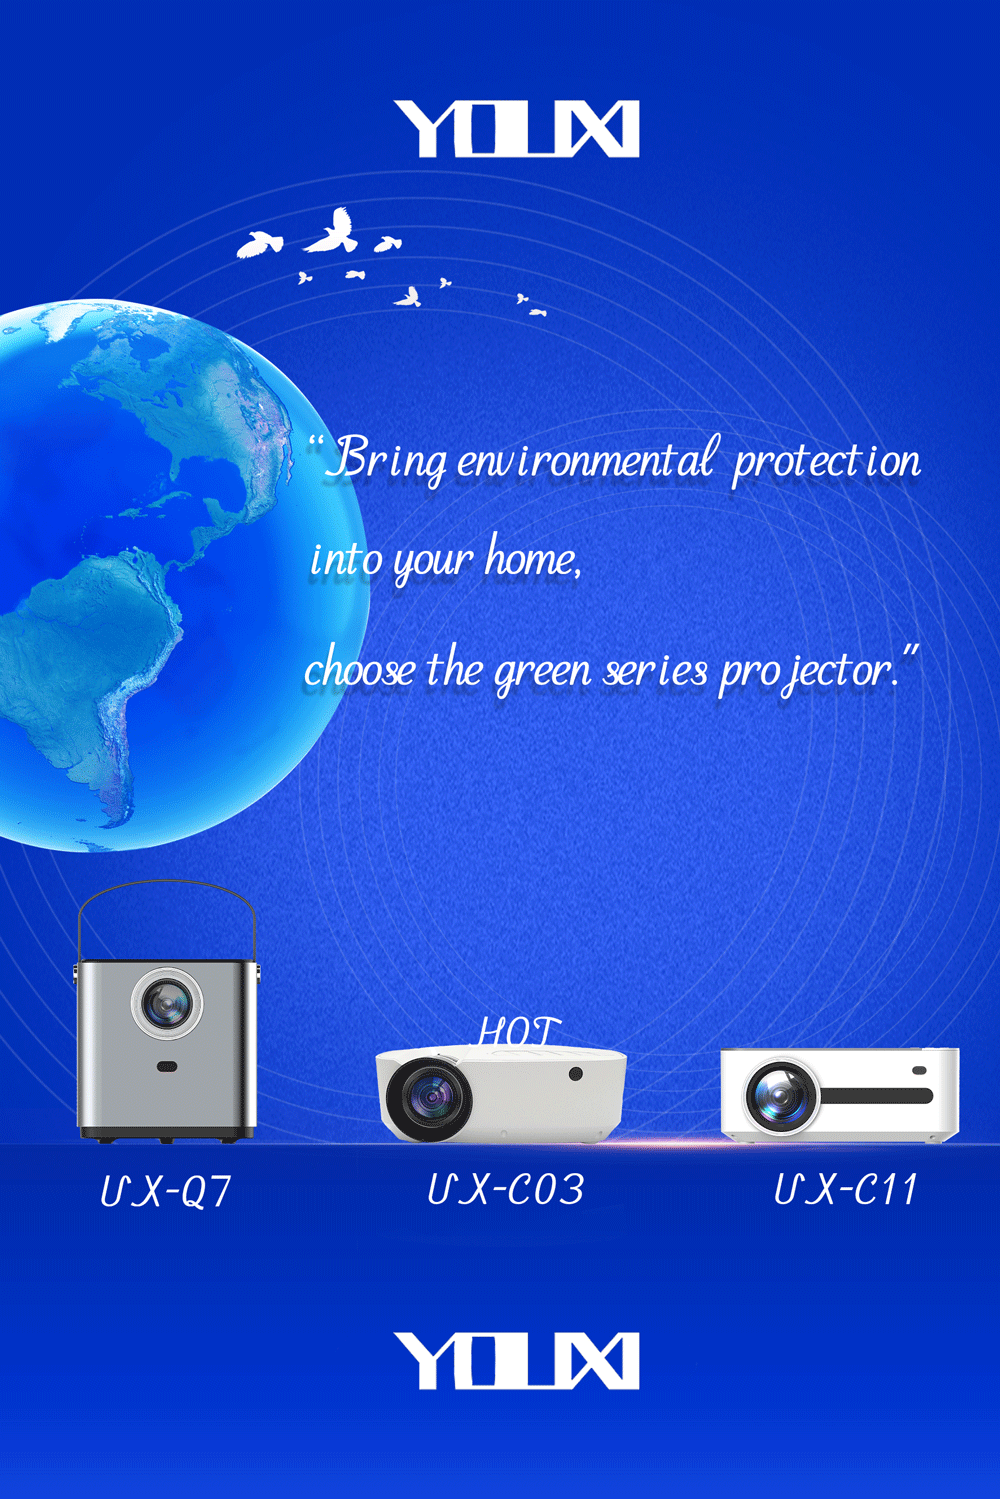 Promotion of green series projectors